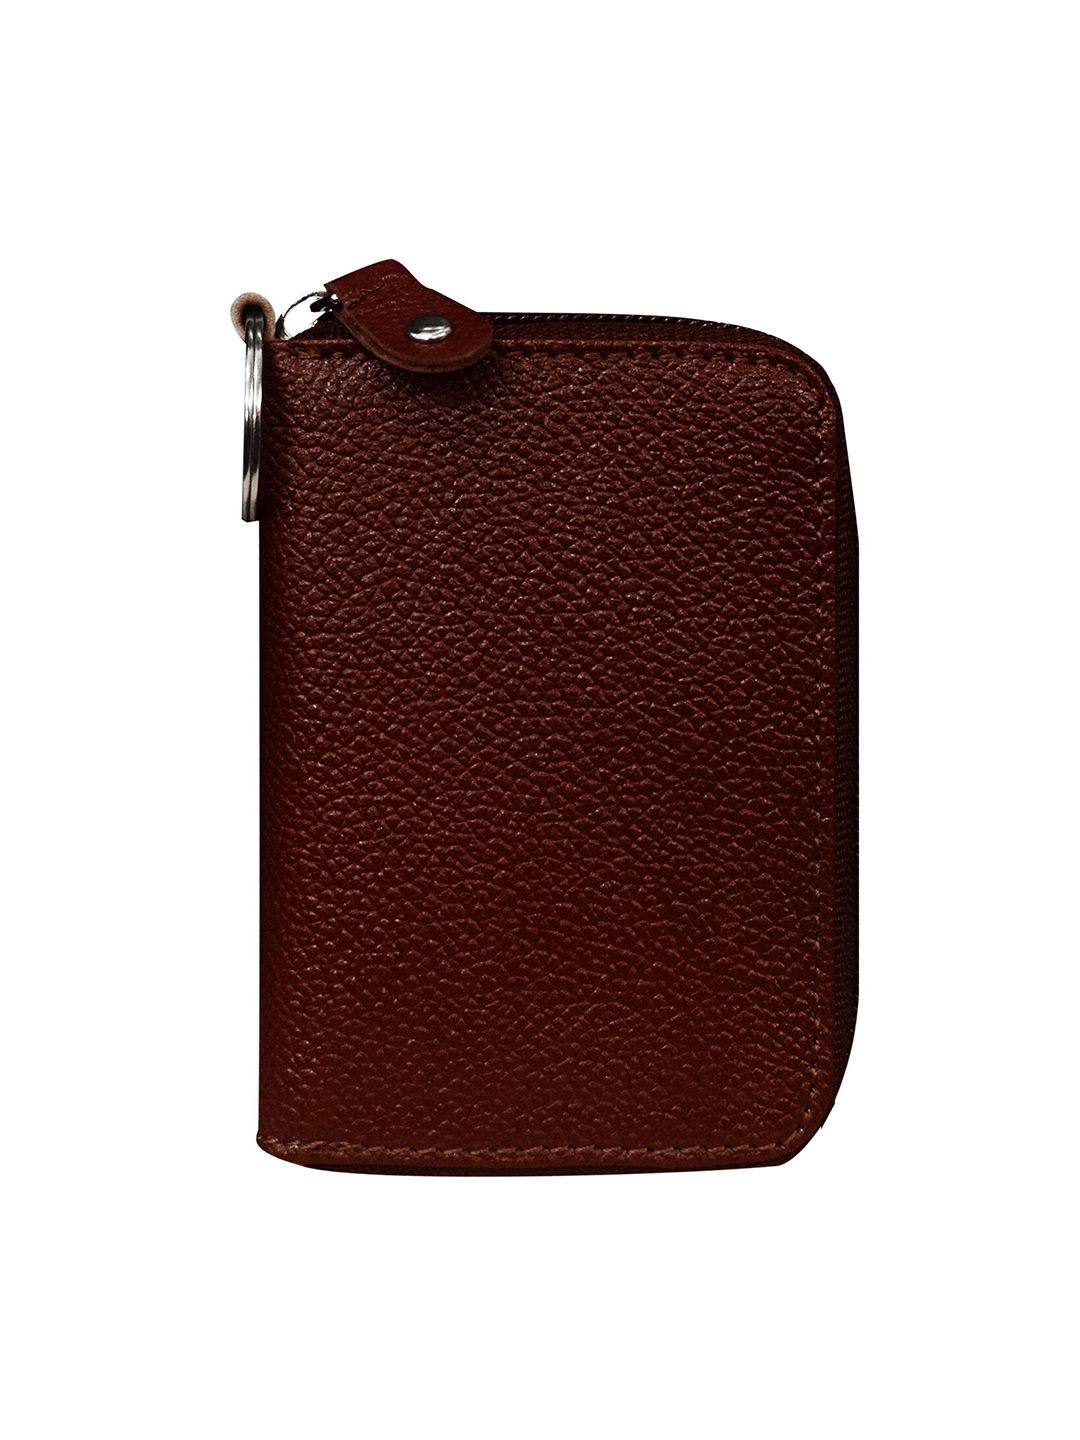 ABYS Unisex Brown Solid Leather Card Holder Price in India